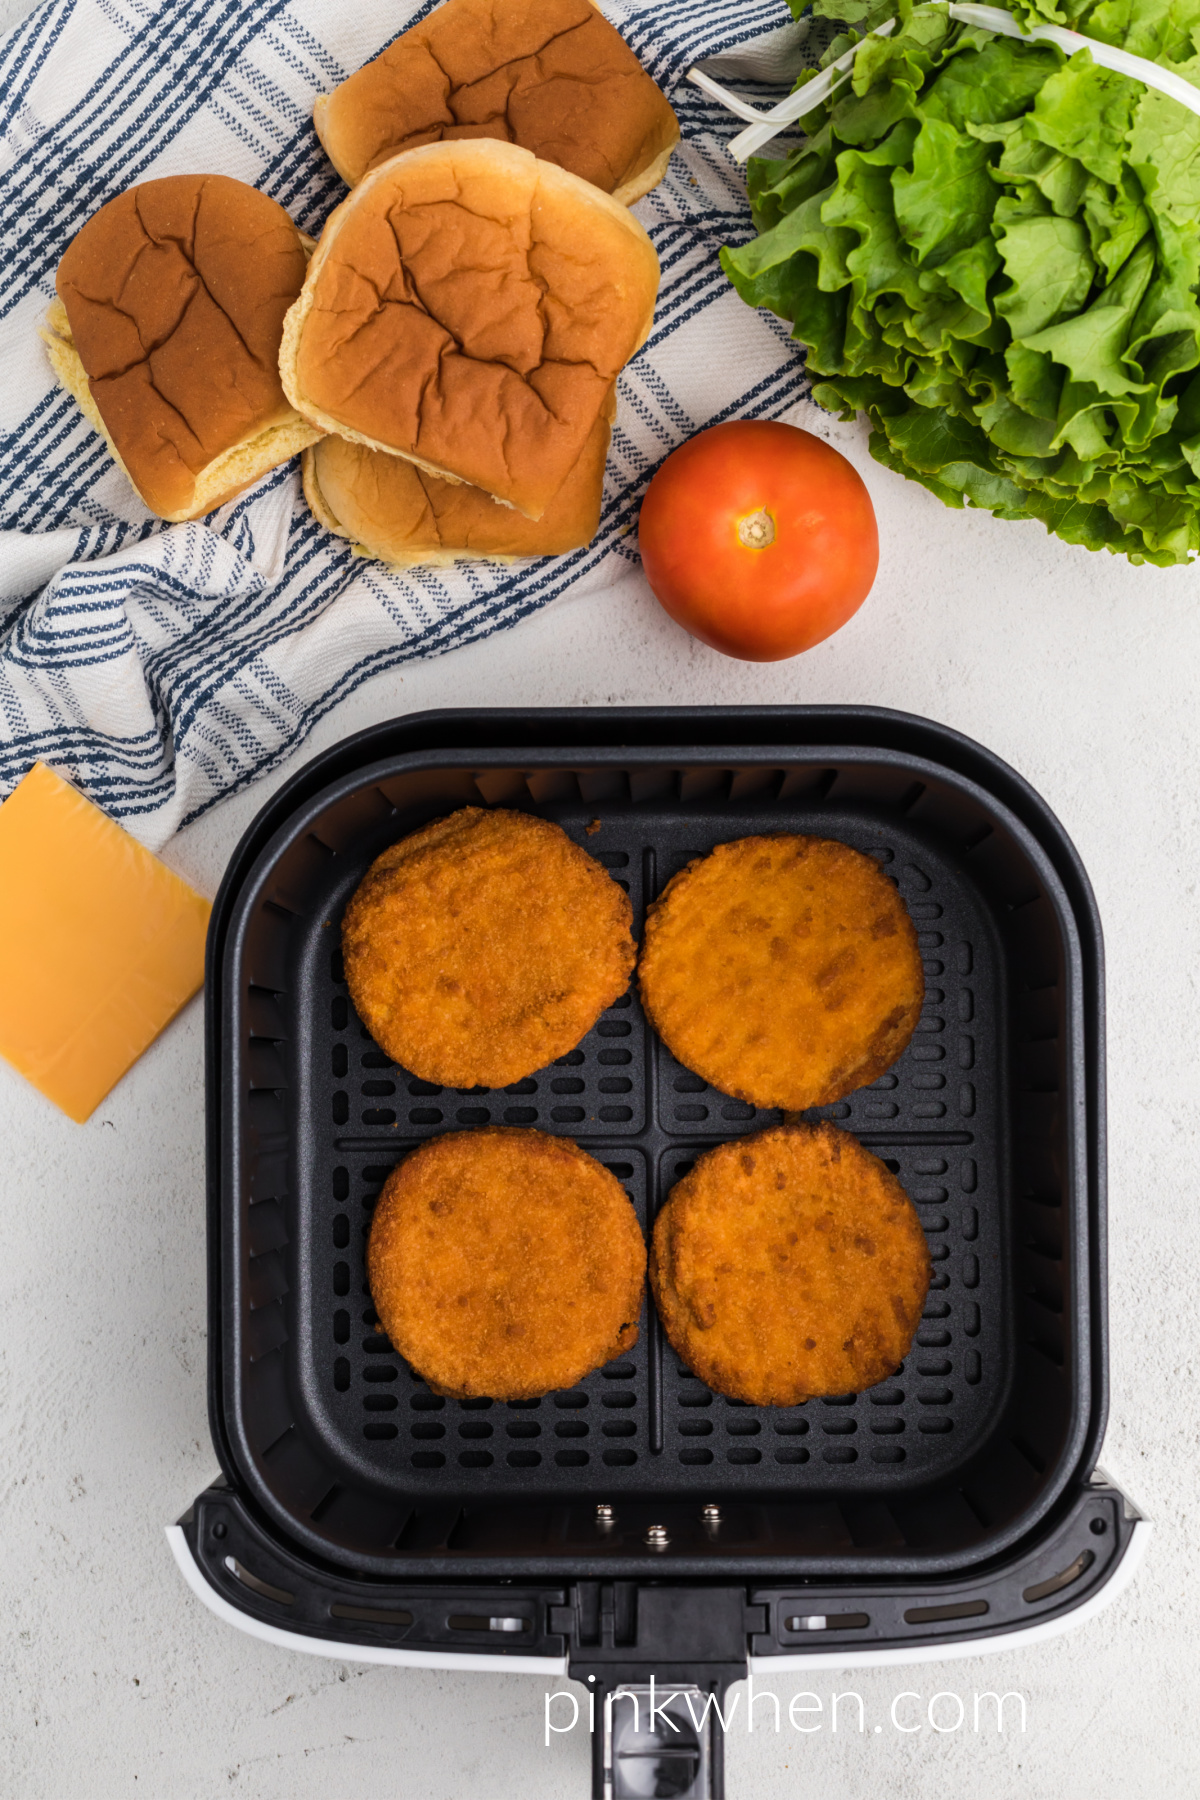 Chicken patties in the basket of the air fryer, ready to be served.